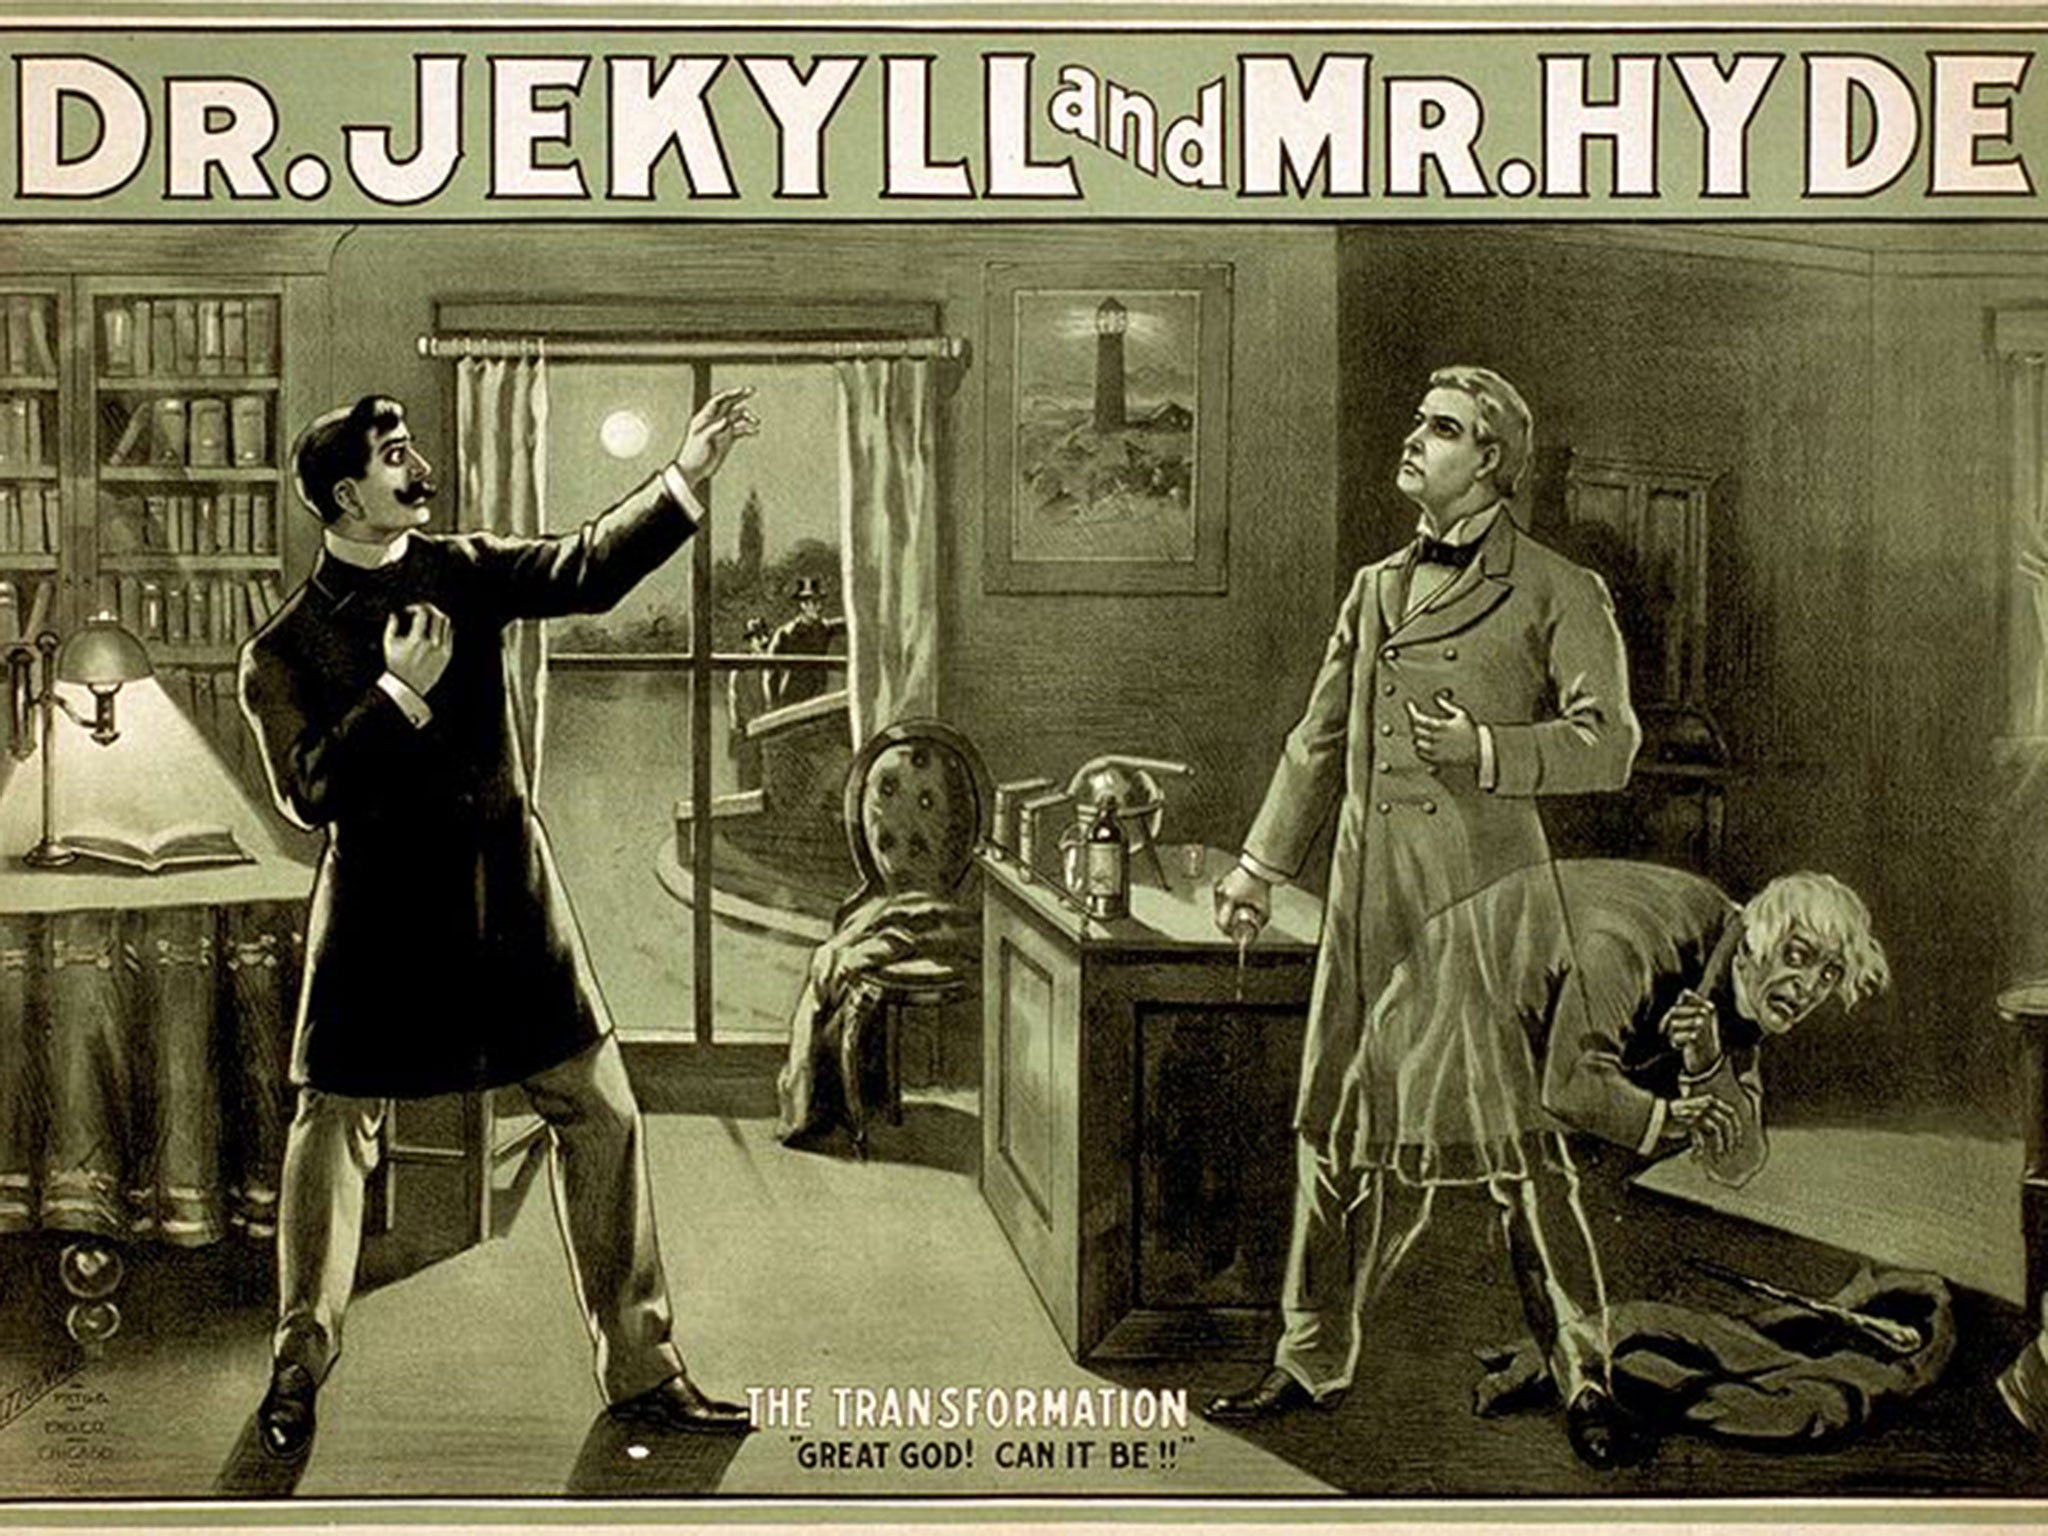 Some drinkers became "Mr Hyde" types, and were hostile and disagreeable (Image: Creative Commons)